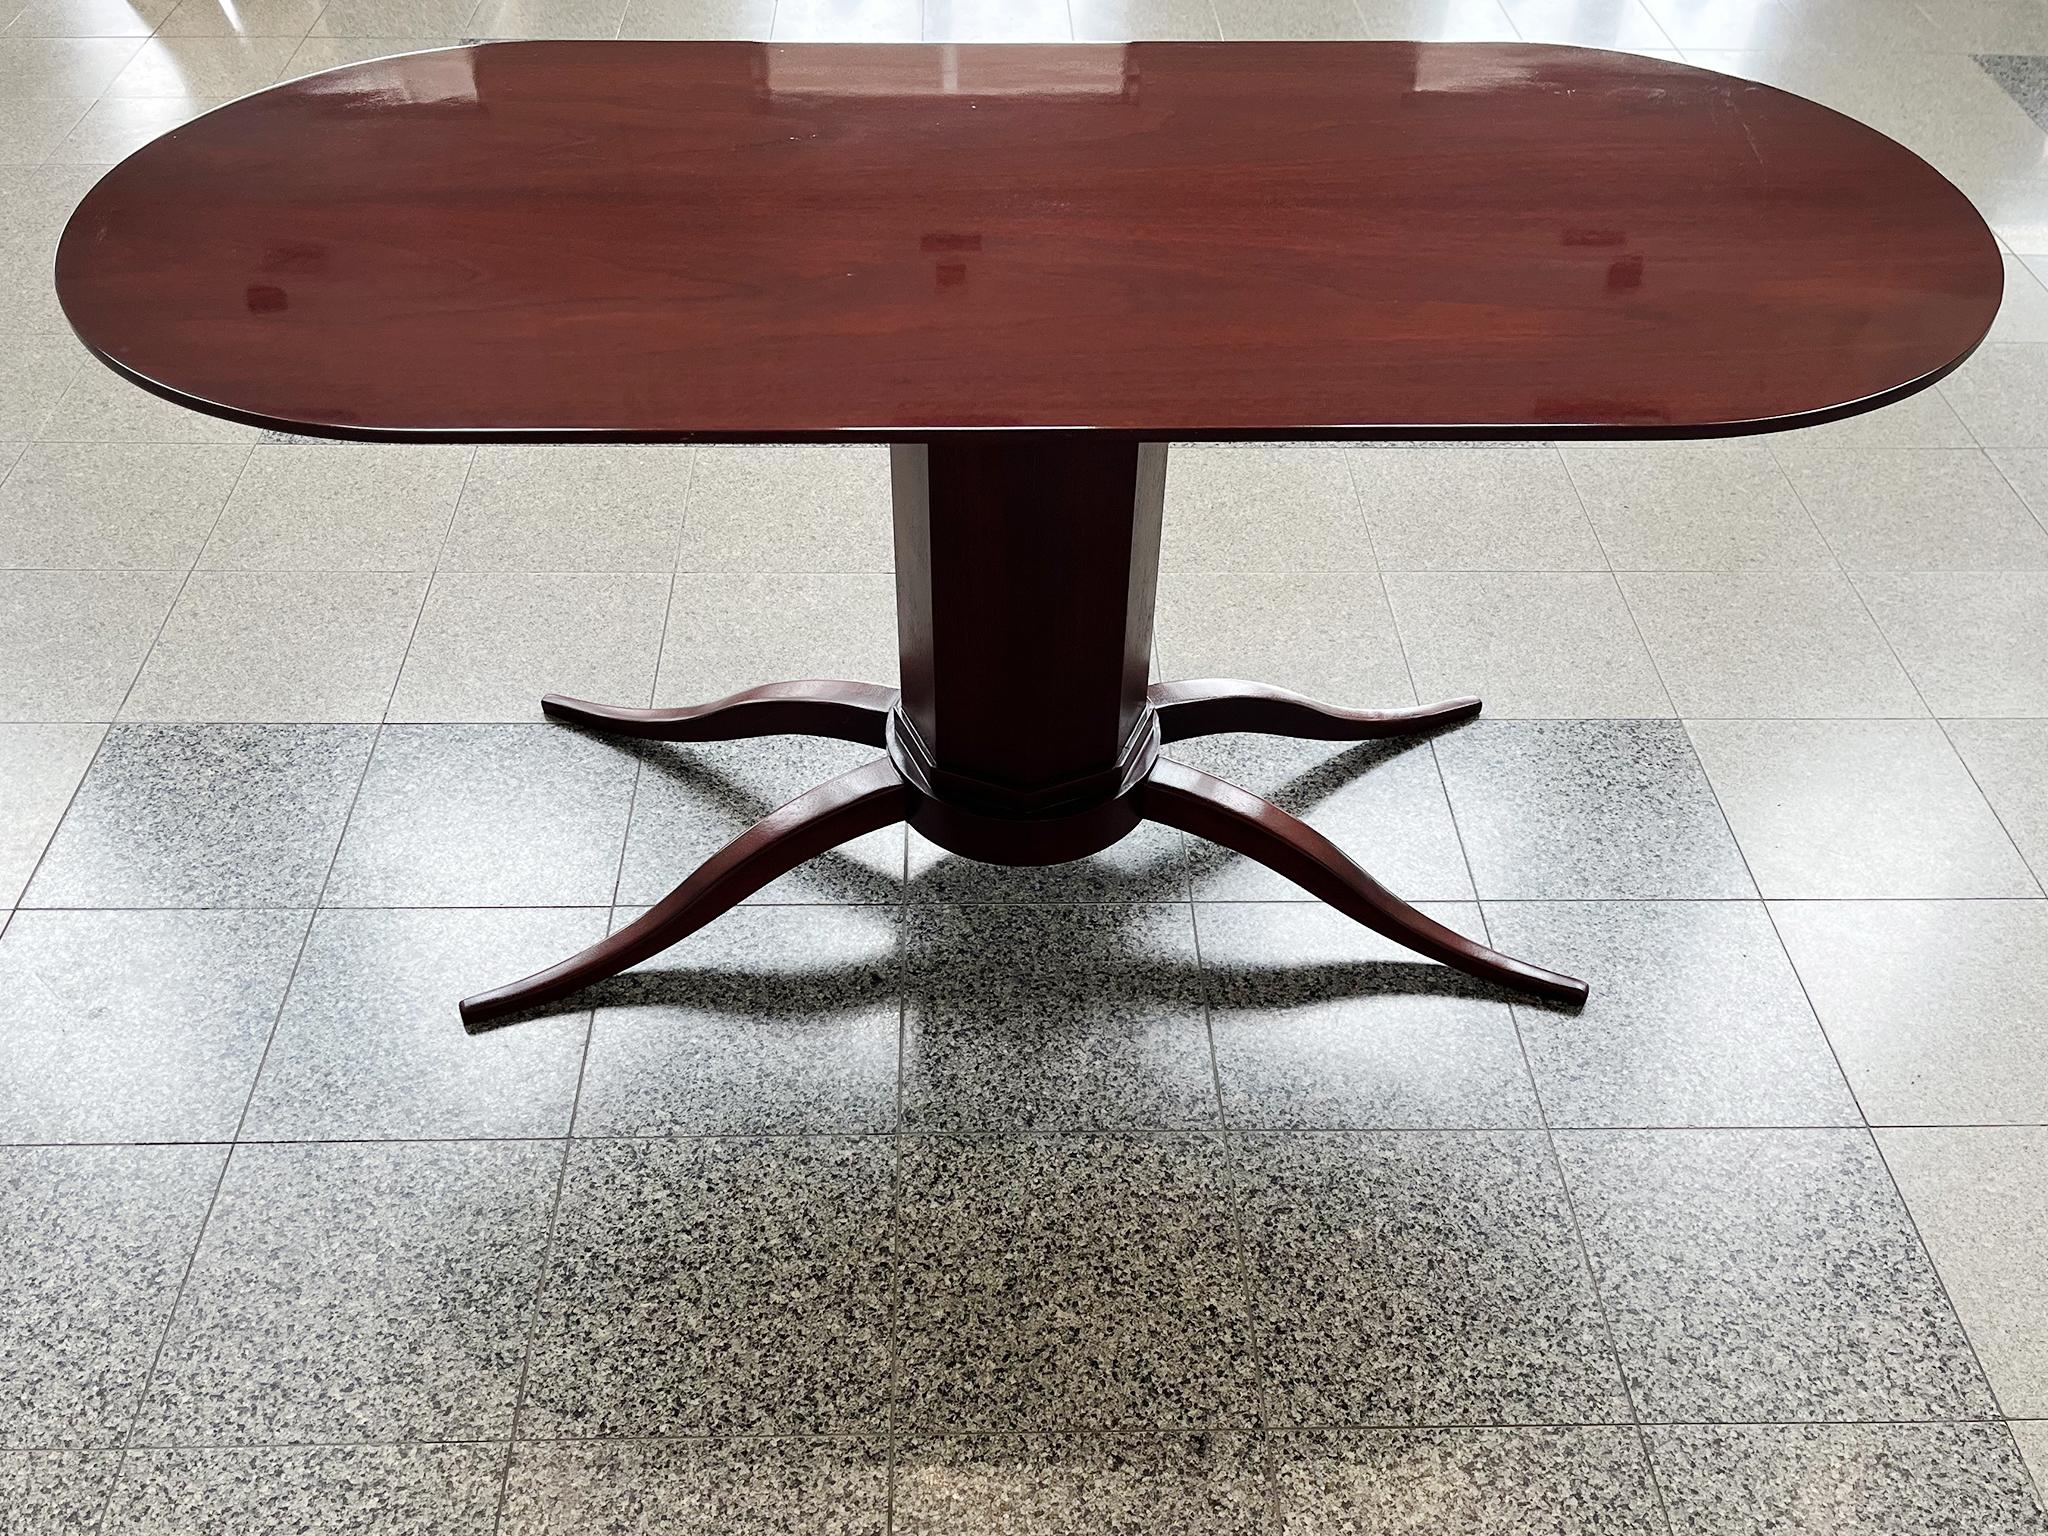 1920s Art Deco Mahogany Racetrack Table In Good Condition For Sale In New York, NY